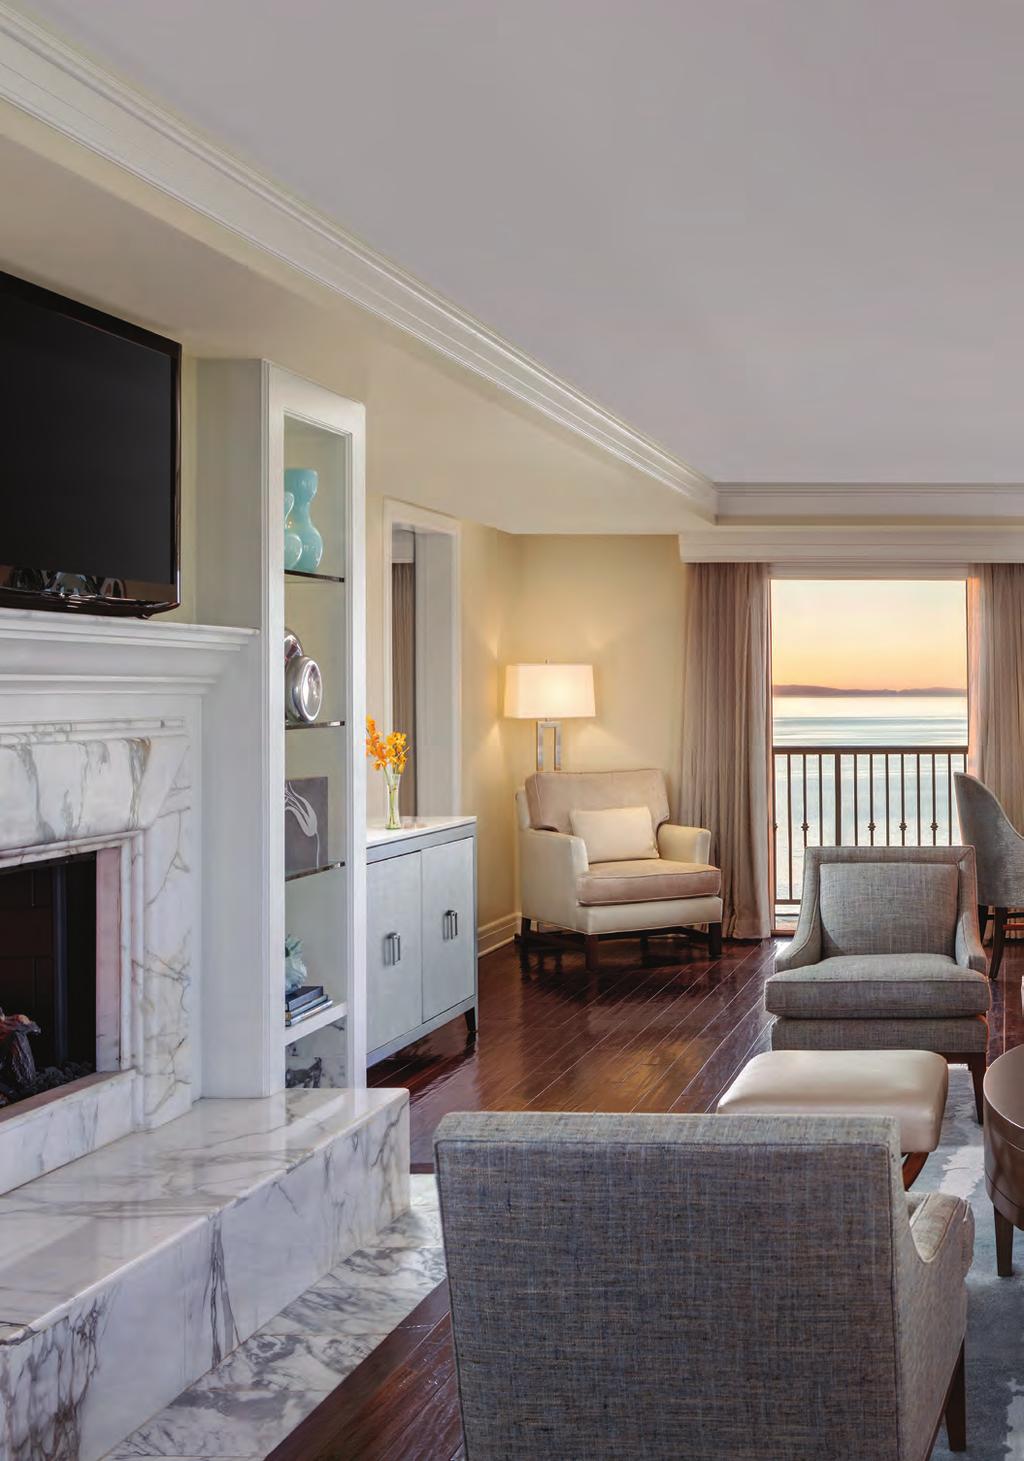 For guests seeking the ultimate in refined comfort and amenities, our suites ensure an added